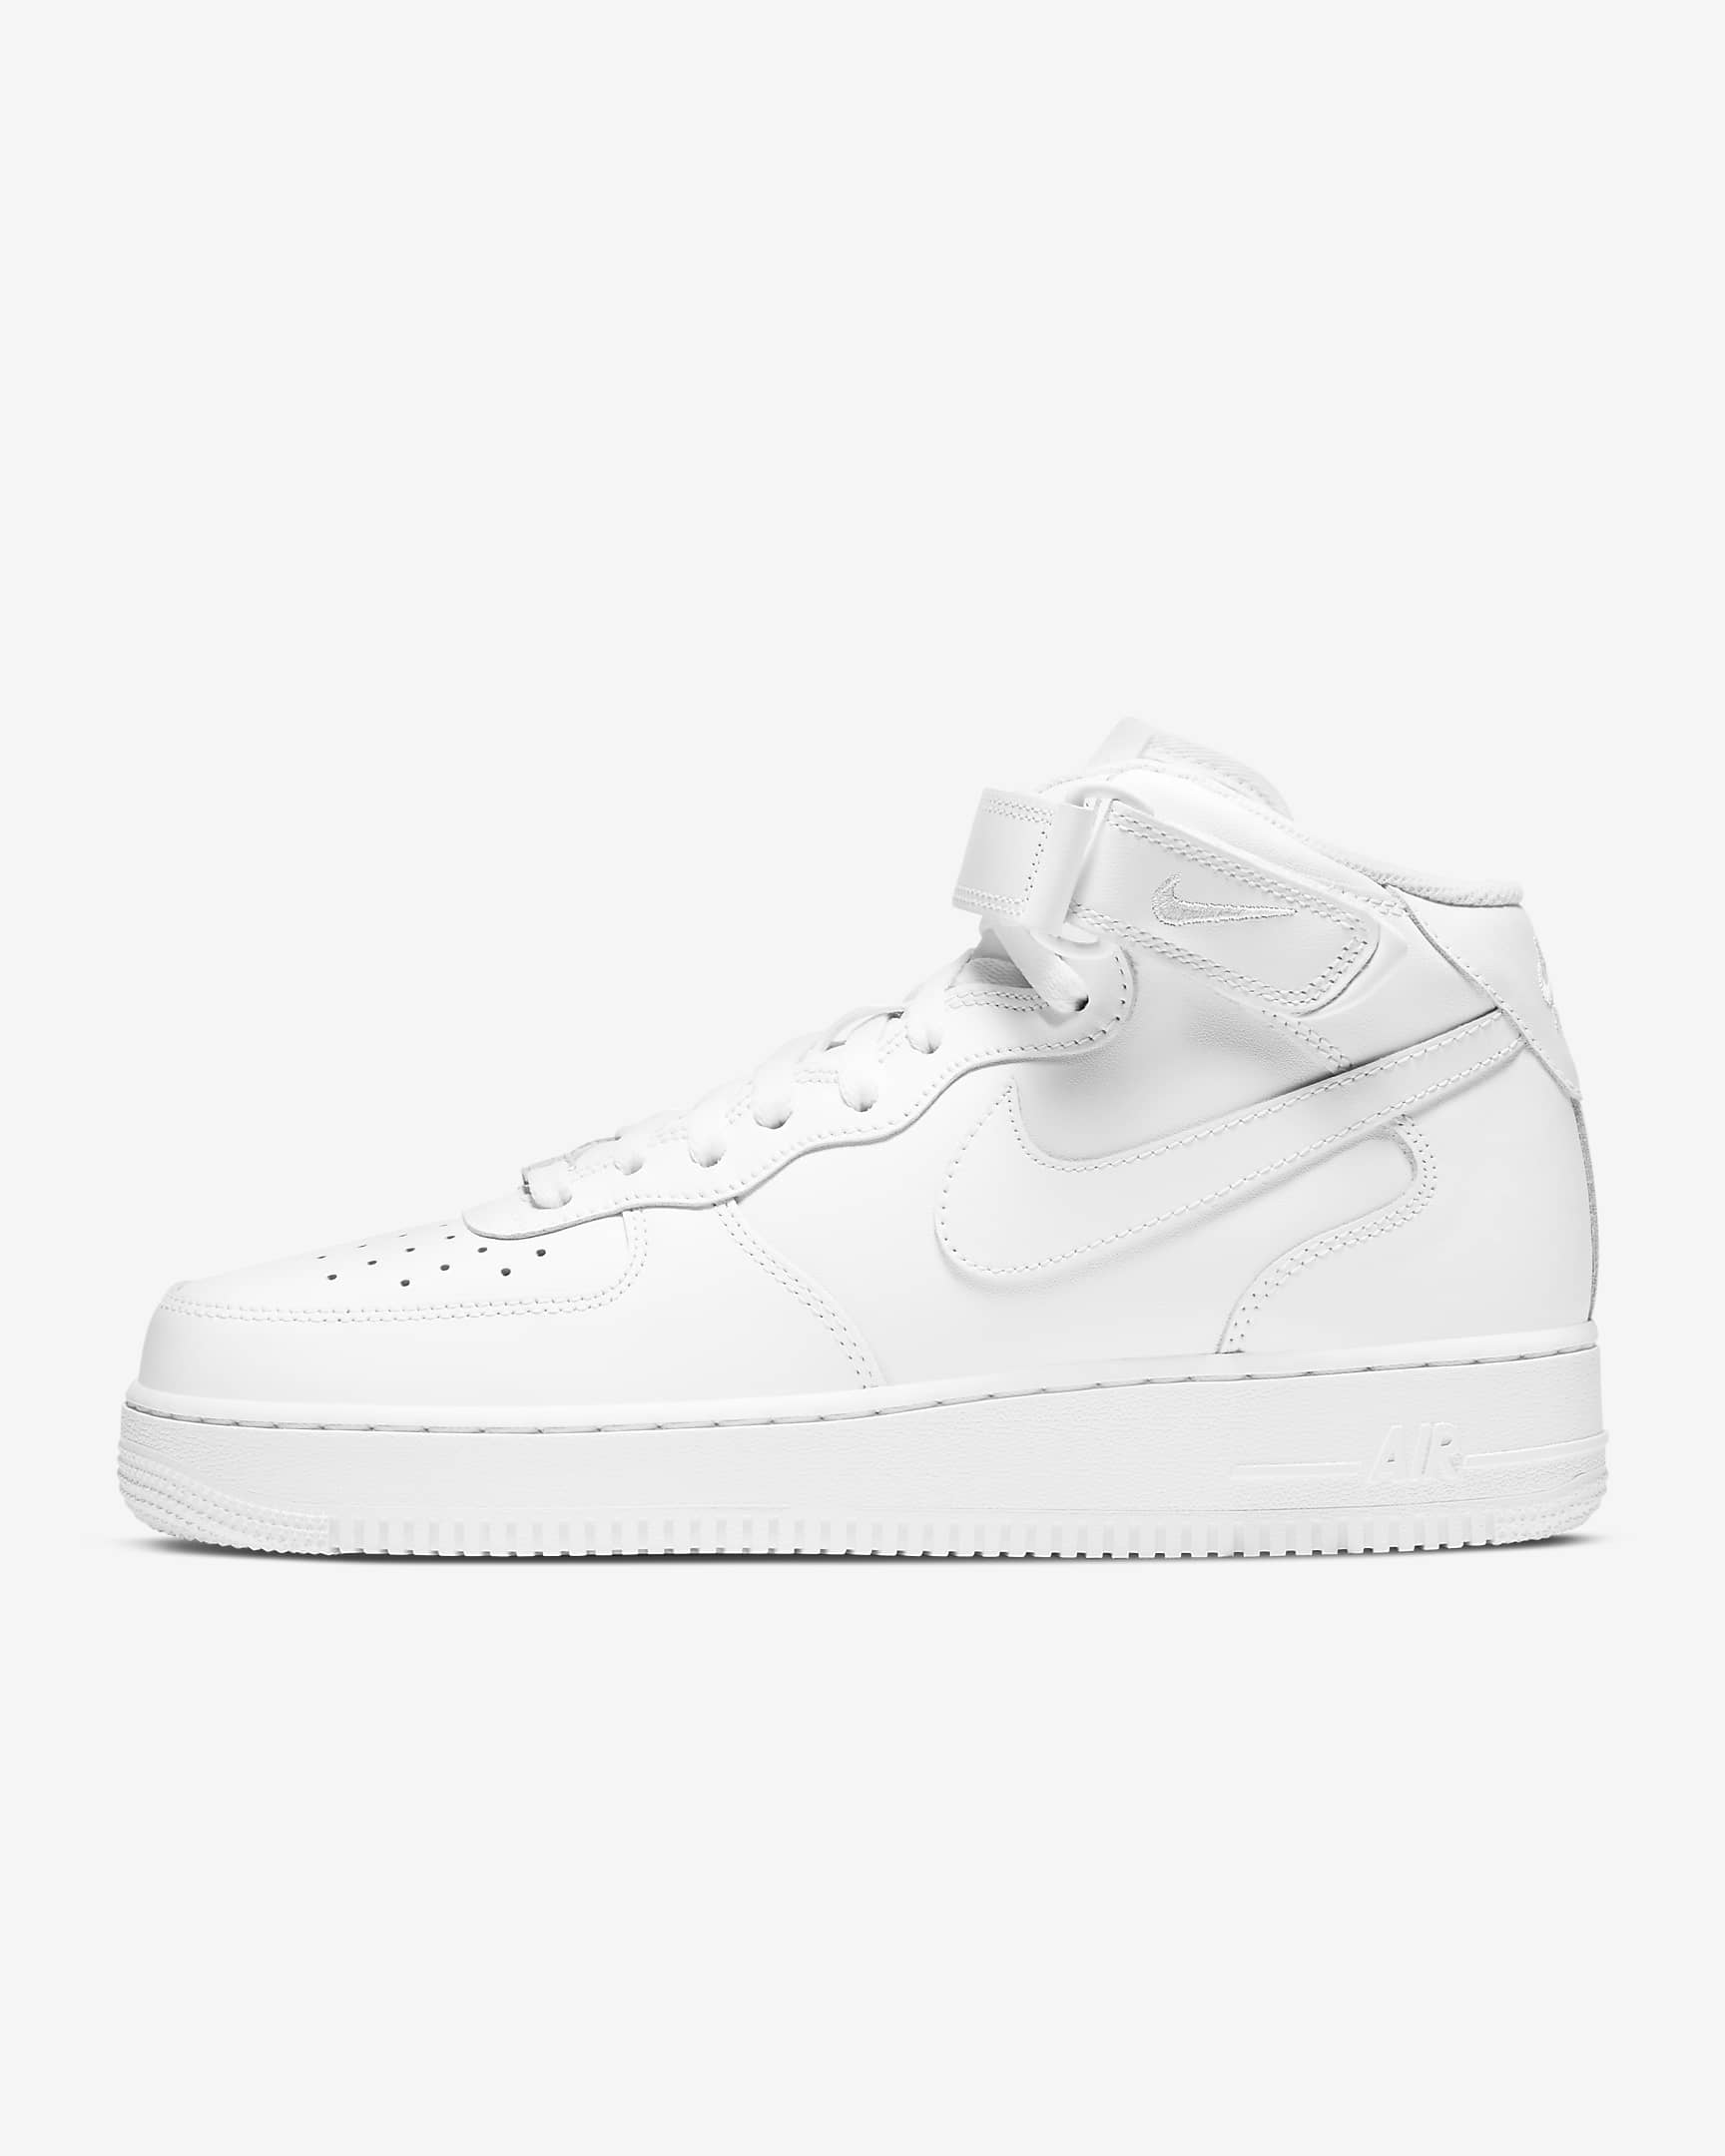 Chaussure Nike Air Force 1 Mid '07 pour Homme - Blanc/Blanc